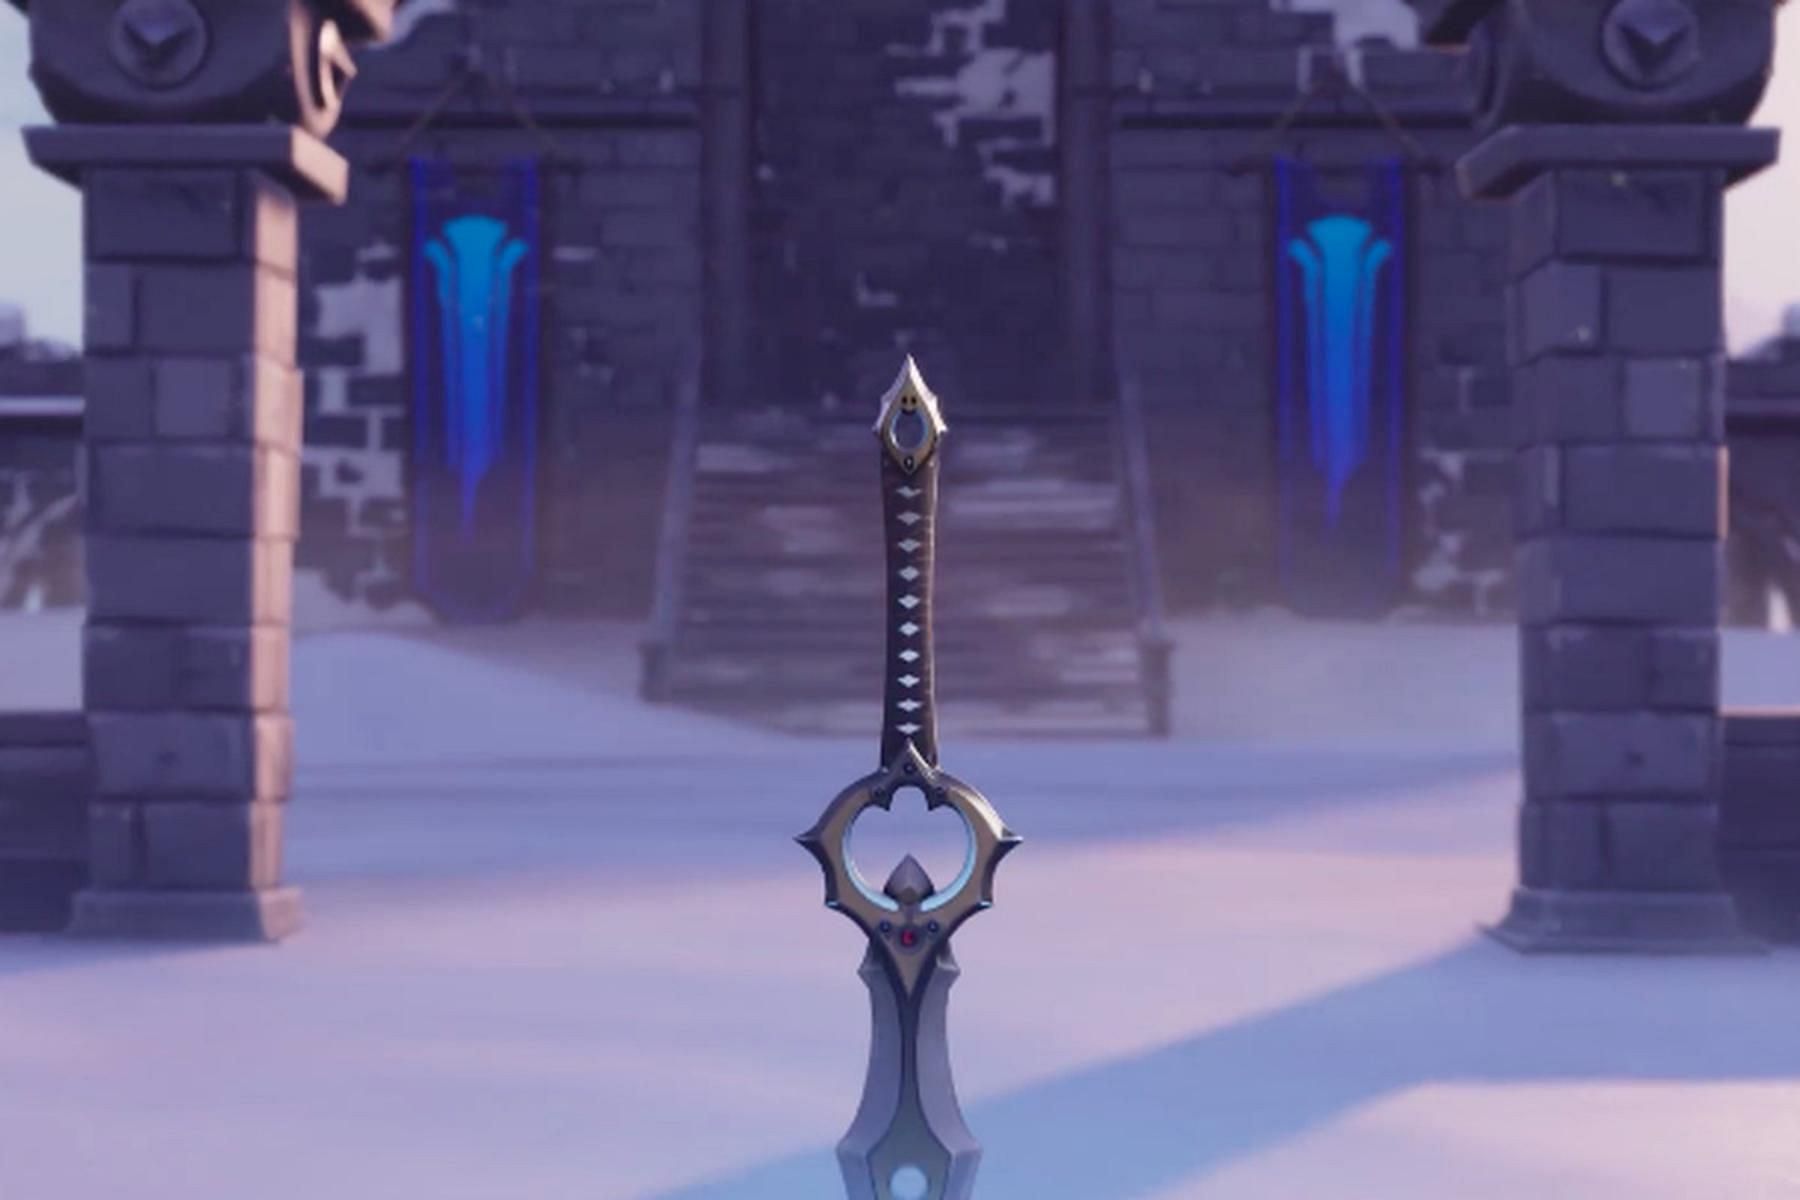 Fortnite will soon release a new melee weapon (Image via Epic Games)